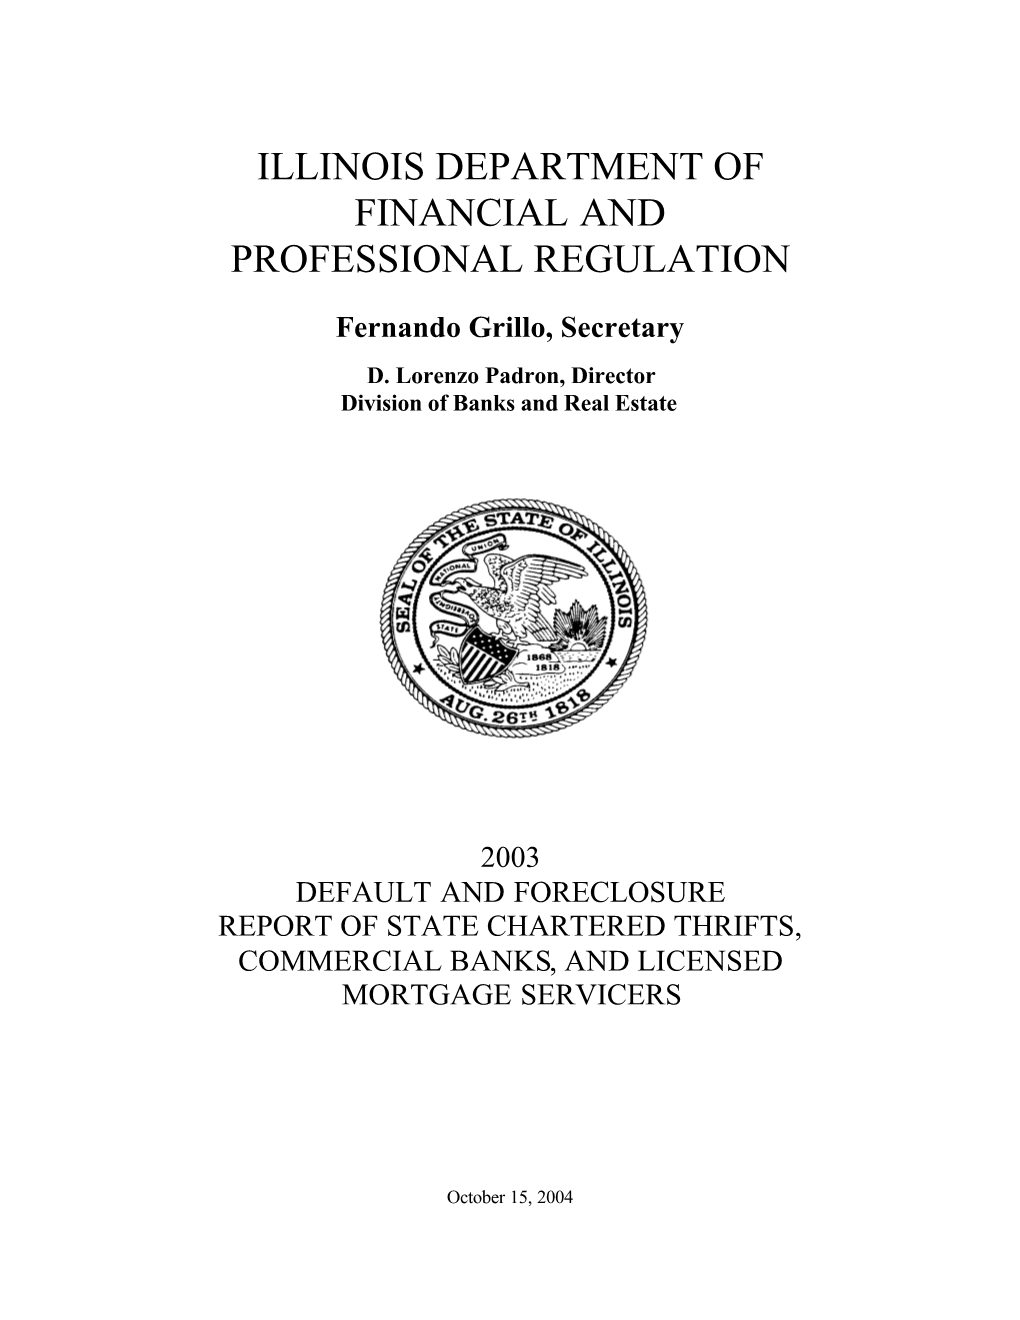 Illinois Department of Financial and Professional Regulation